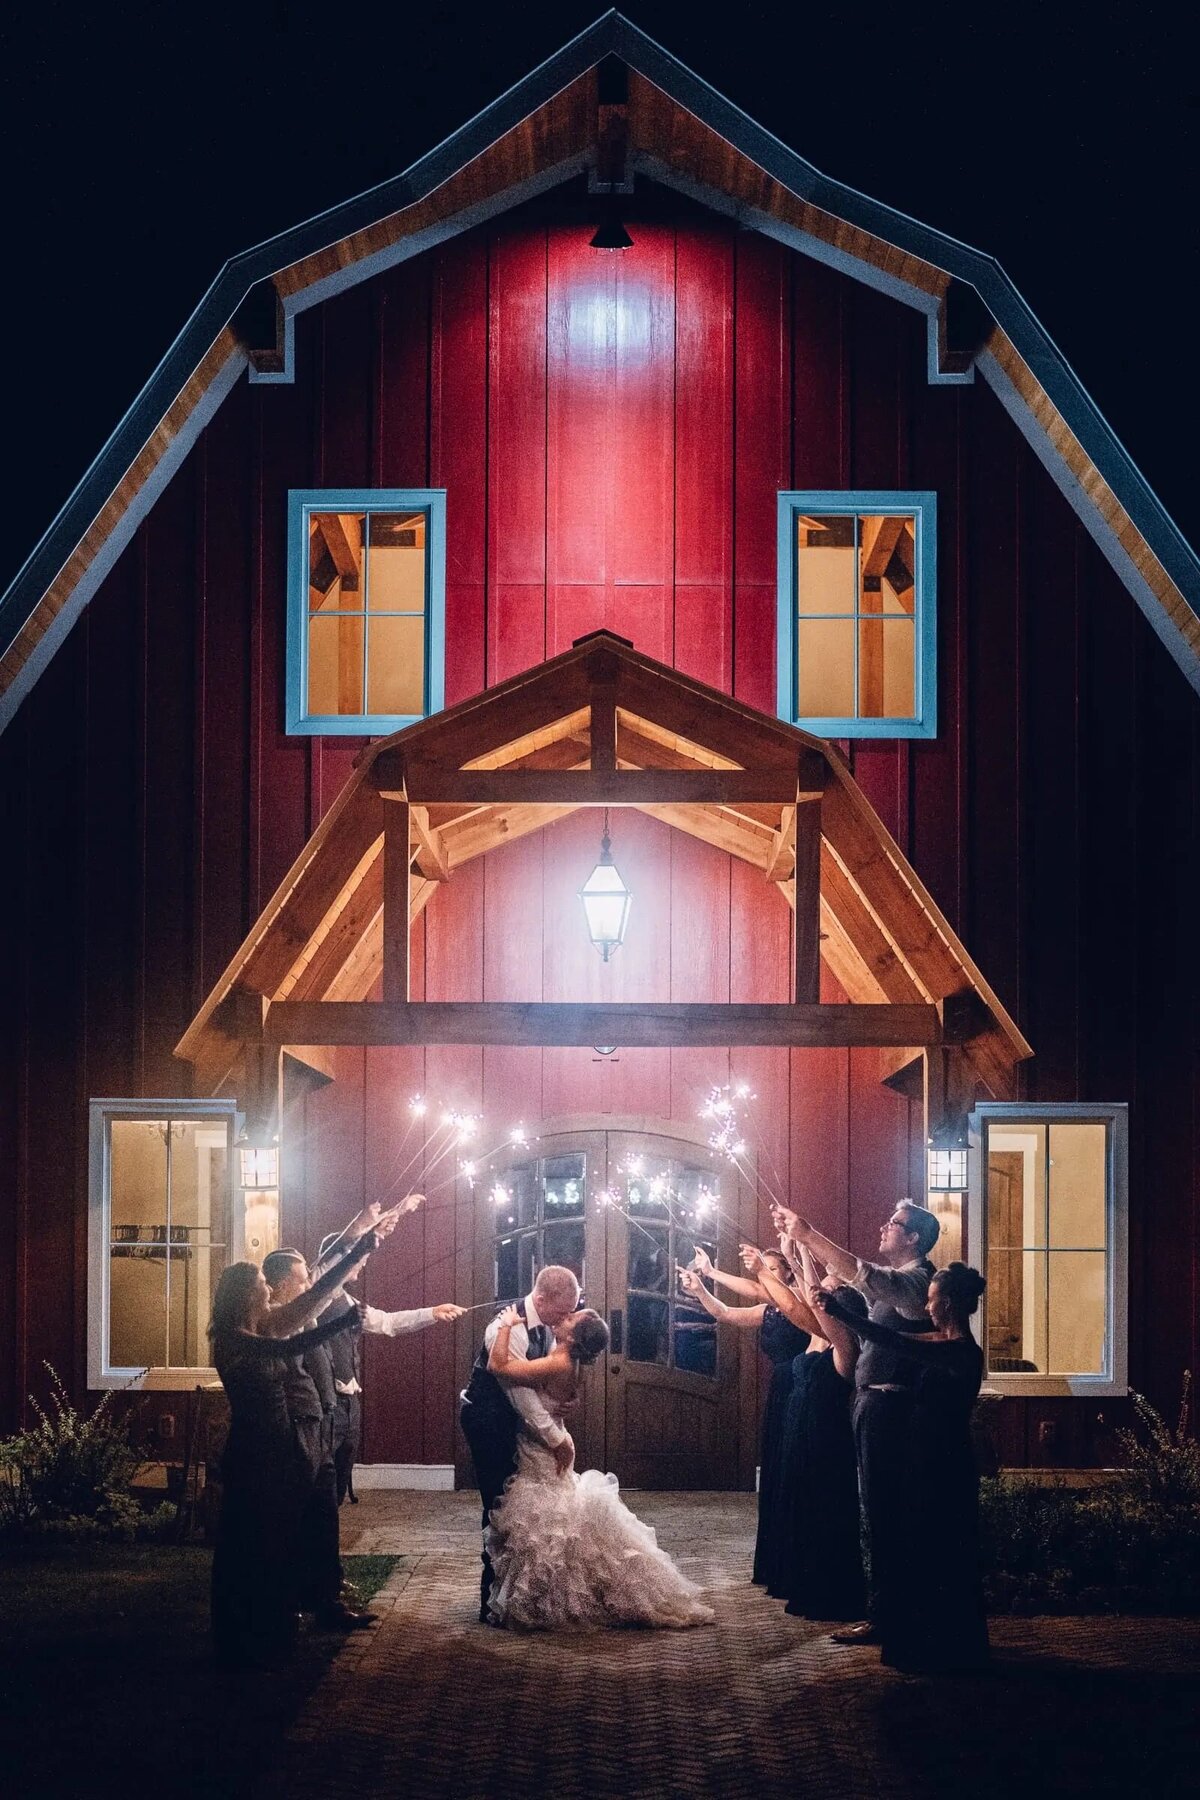 A rustic barn forms the backdrop for a magical wedding moment, with the bride and groom sharing a kiss as sparklers light up the night.